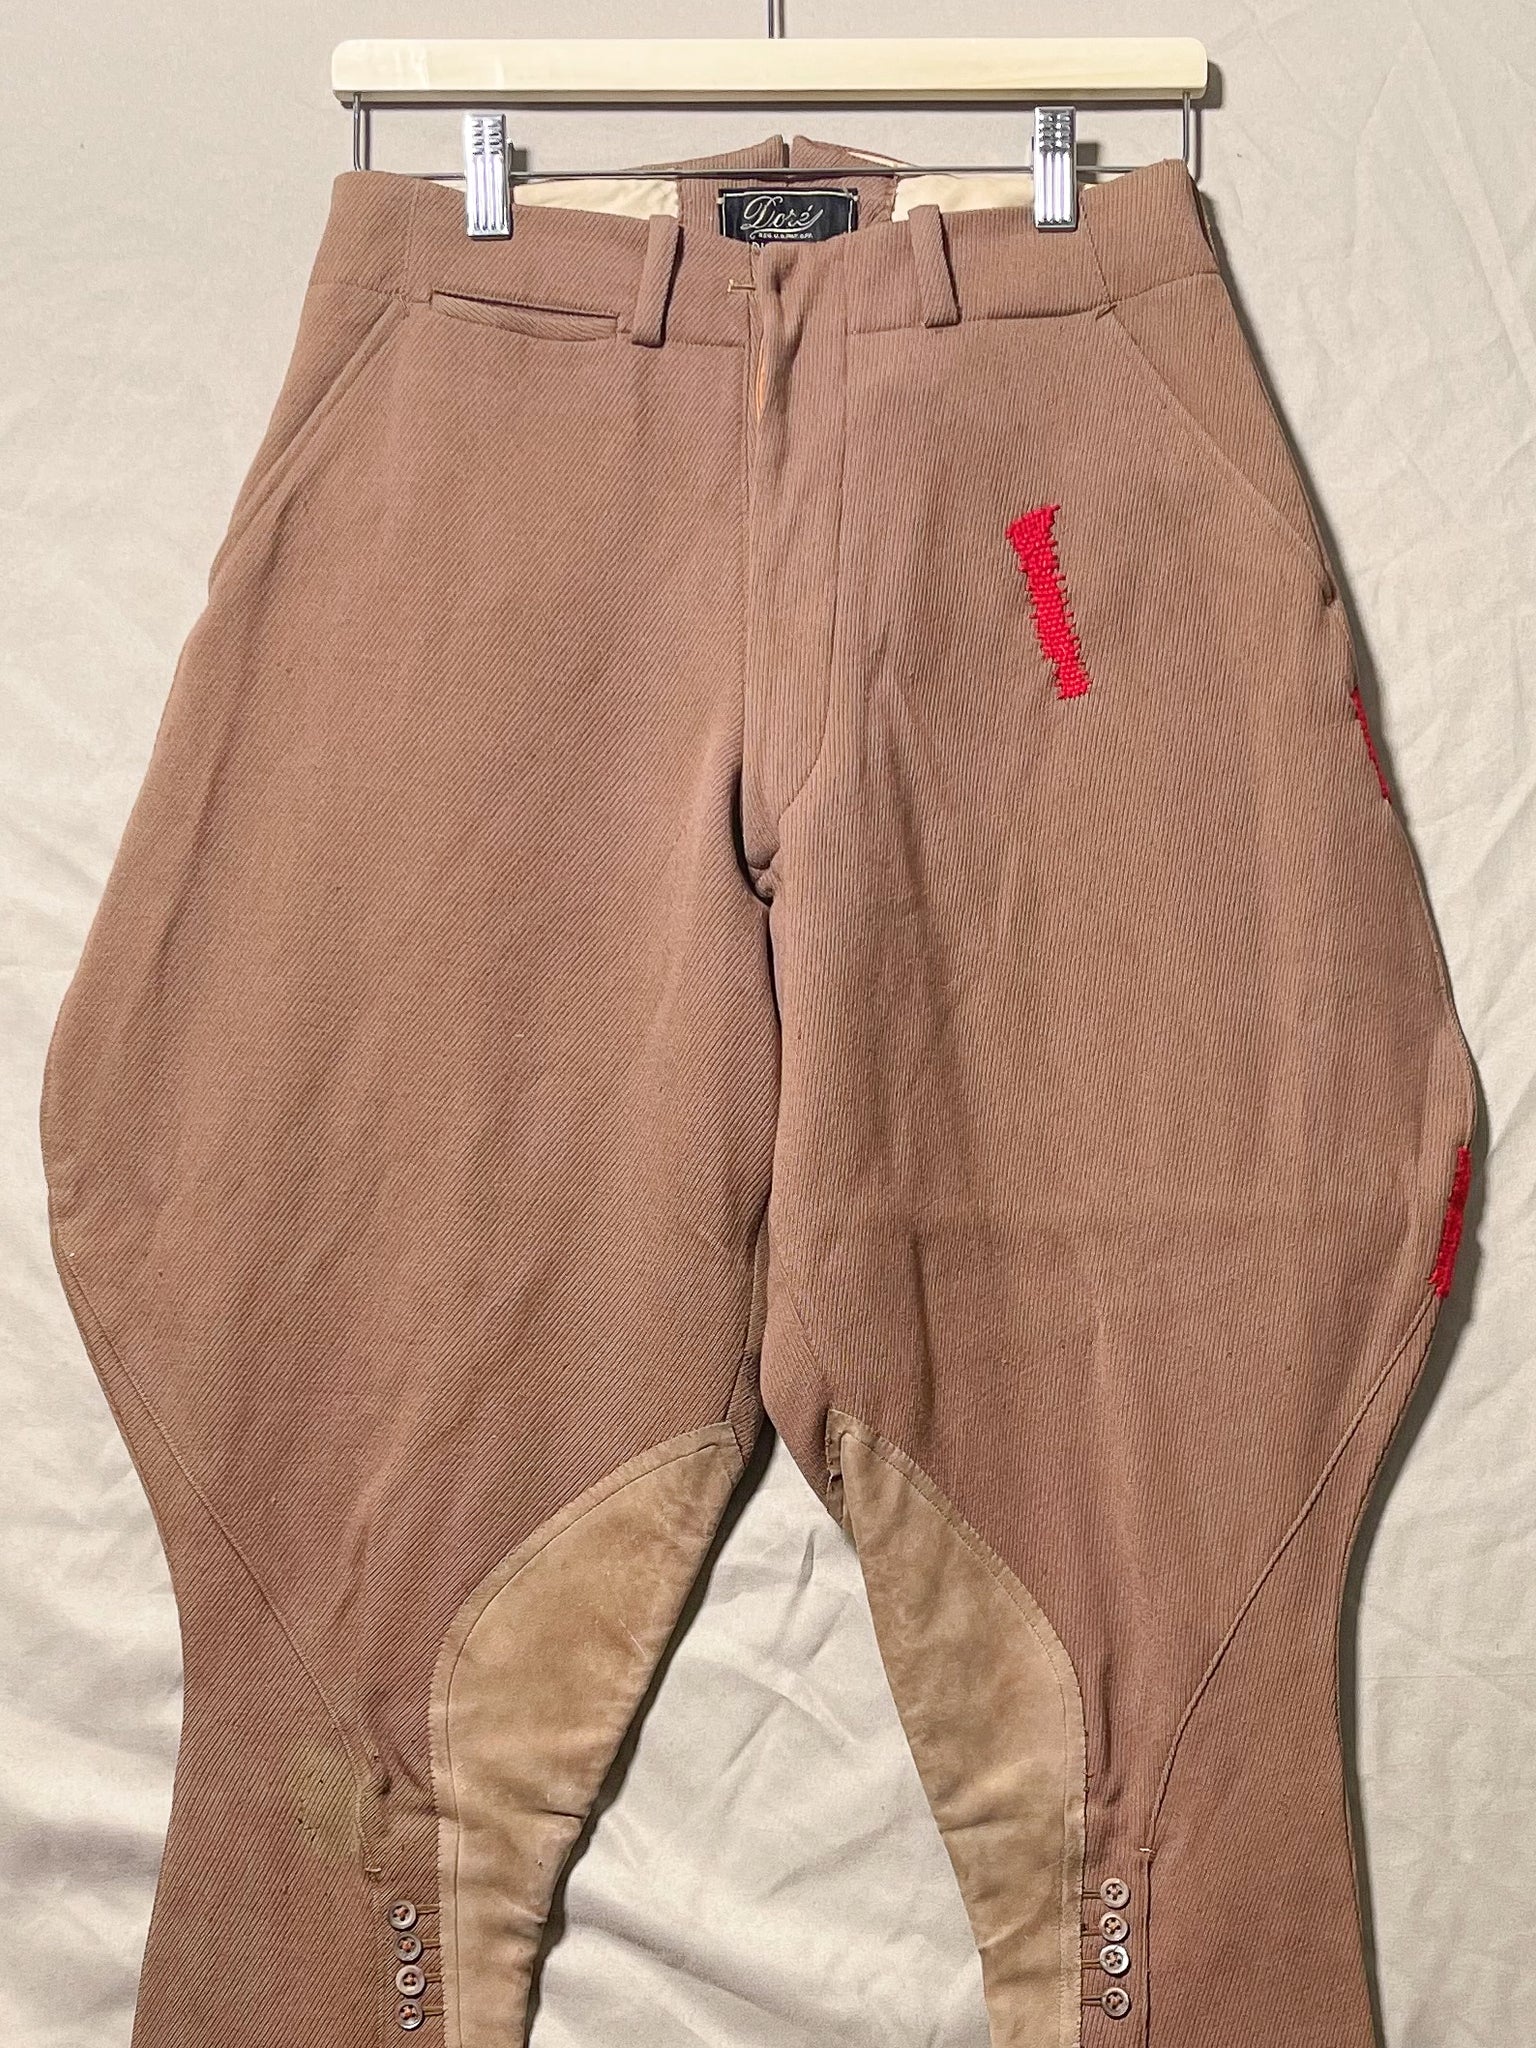 Repaired 1930s 1940s Brown Wool And Leather Jodhpurs Riding Pants (F's US SML)